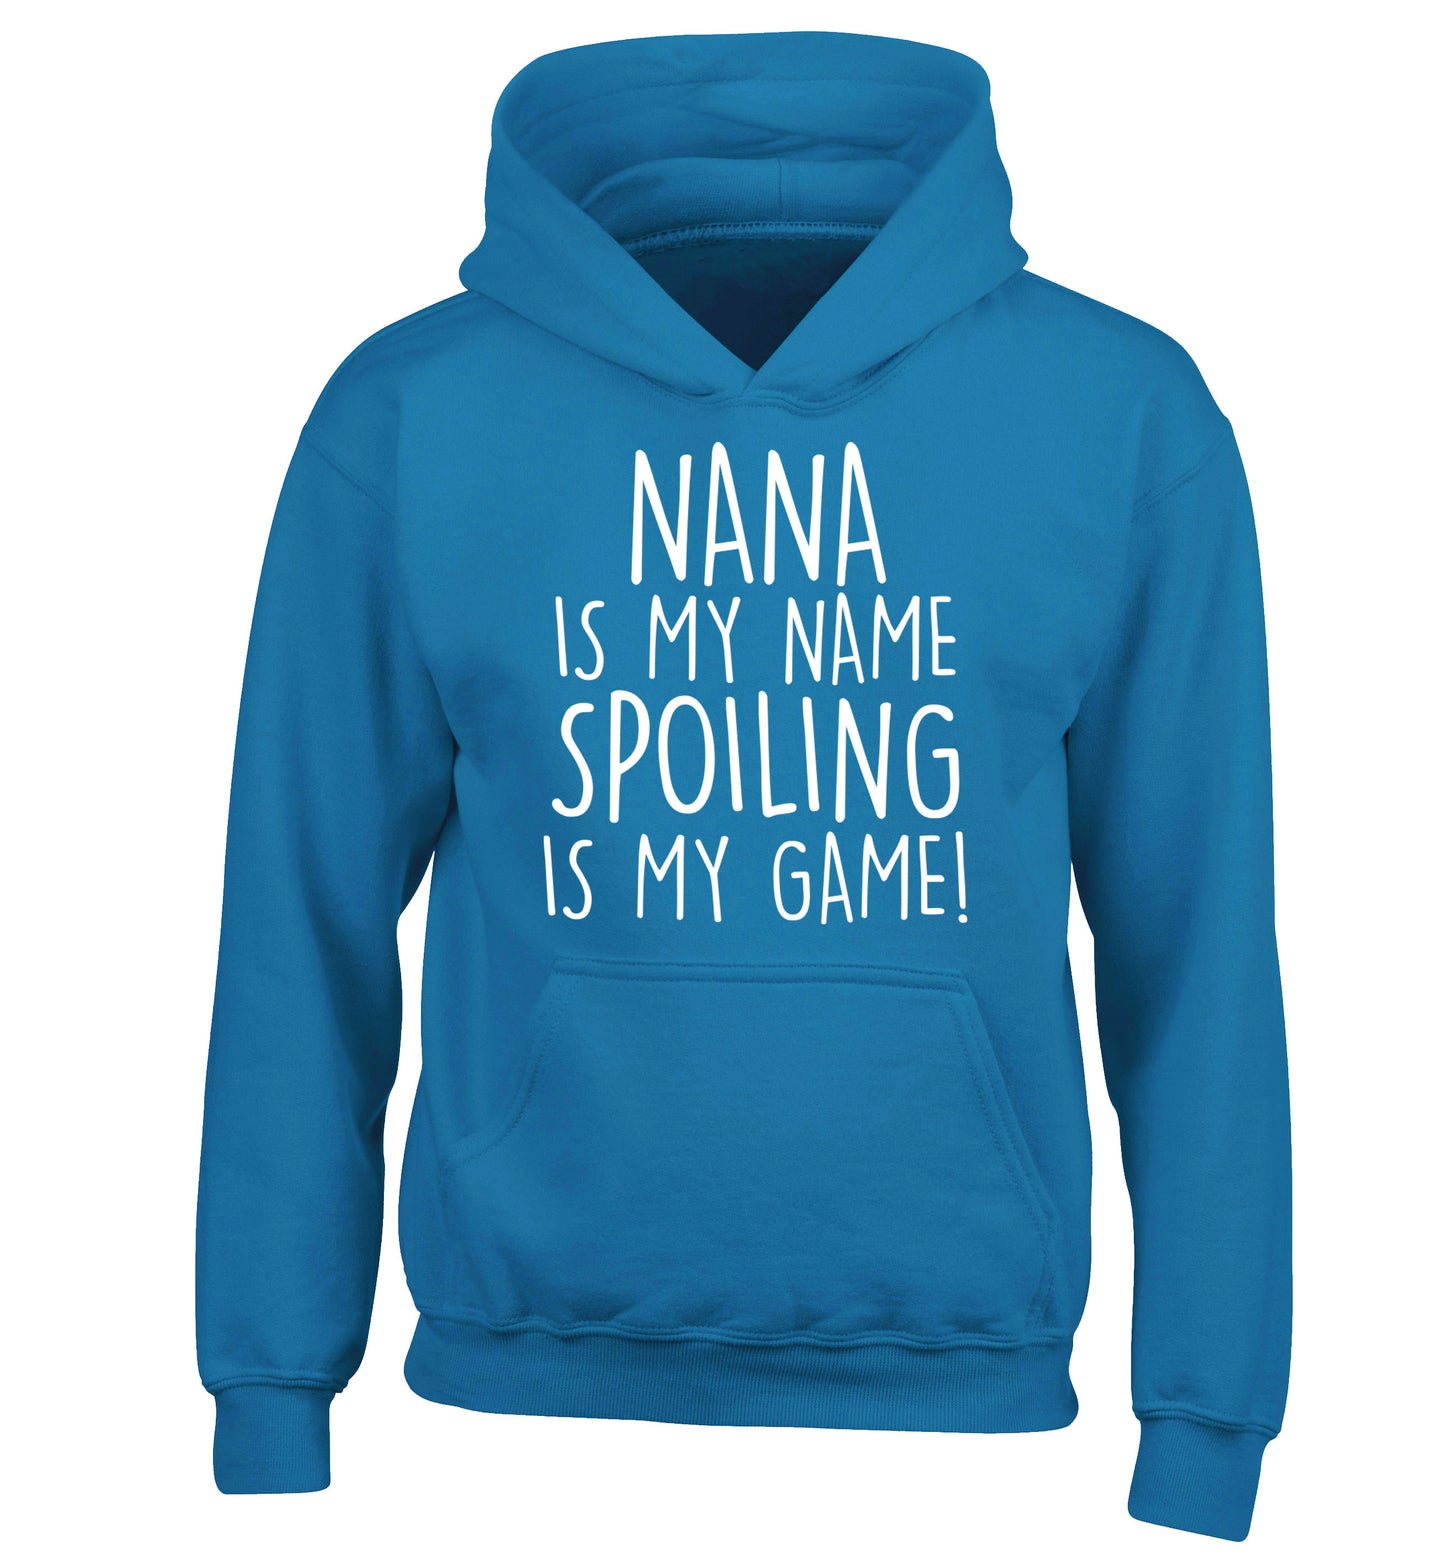 Nana is my name, spoiling is my game children's blue hoodie 12-14 Years